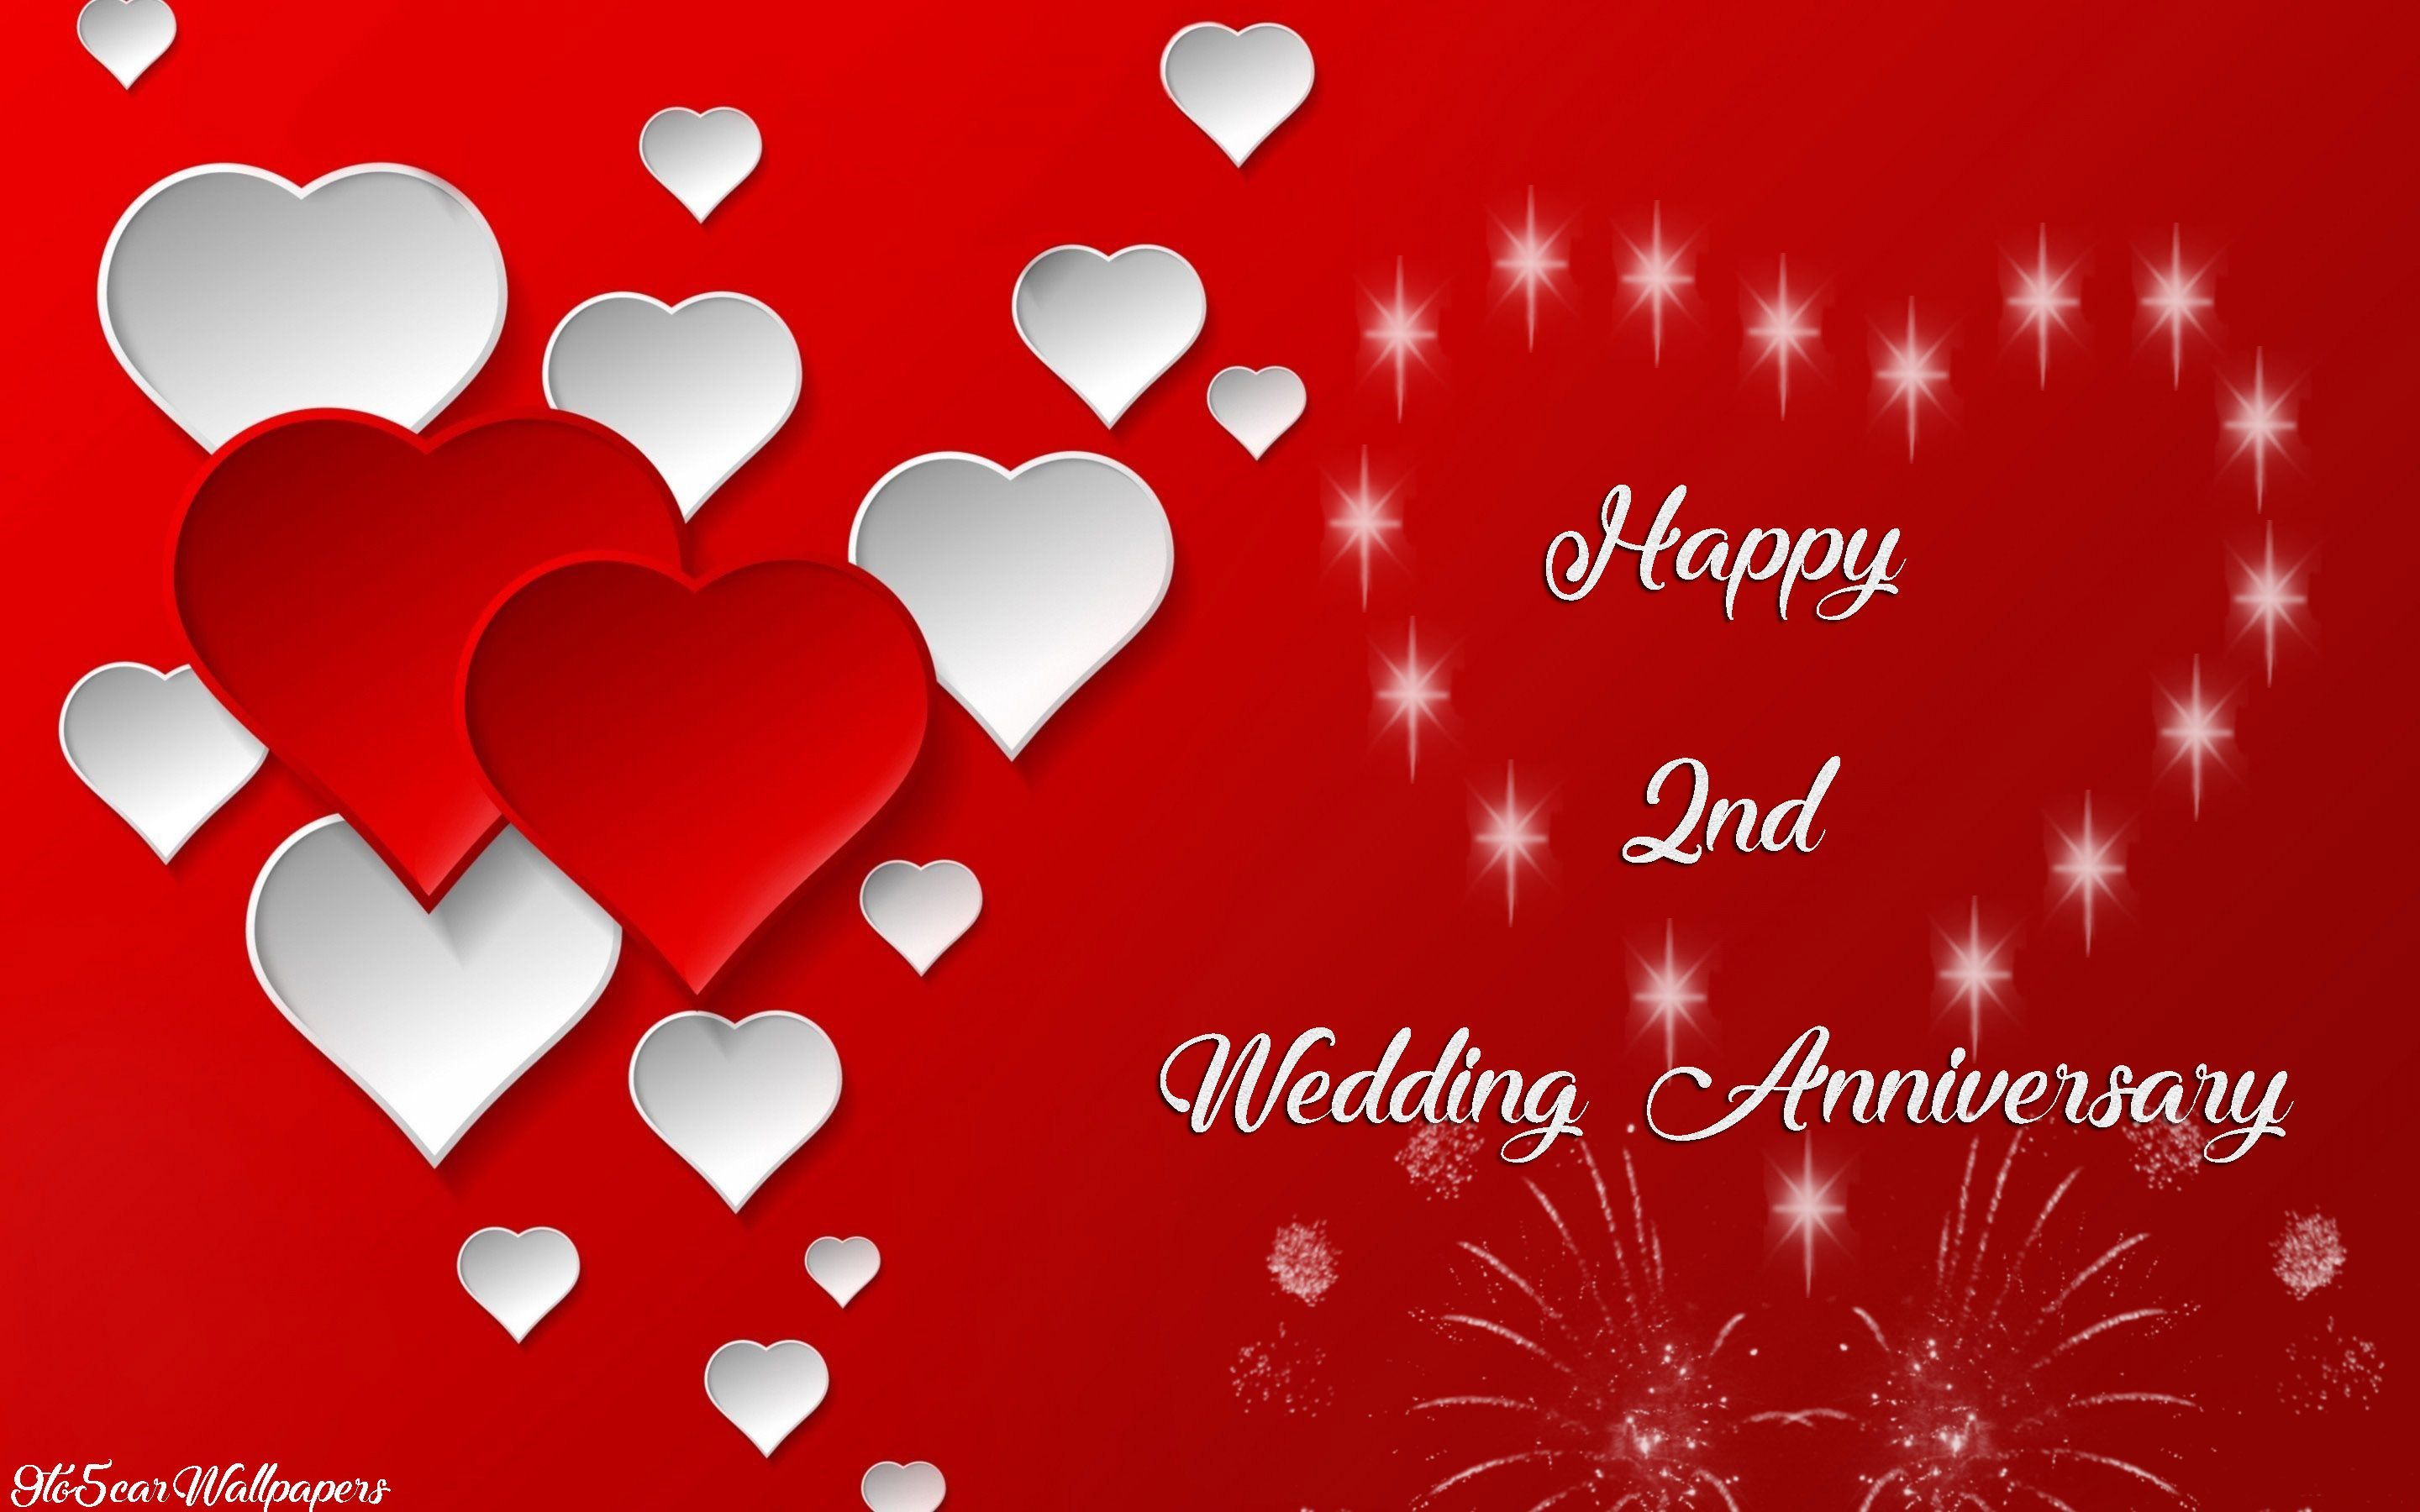 Second Marriage Anniversary Image & Downloads. Happy wedding anniversary wishes, Happy marriage anniversary, Marriage anniversary gifts